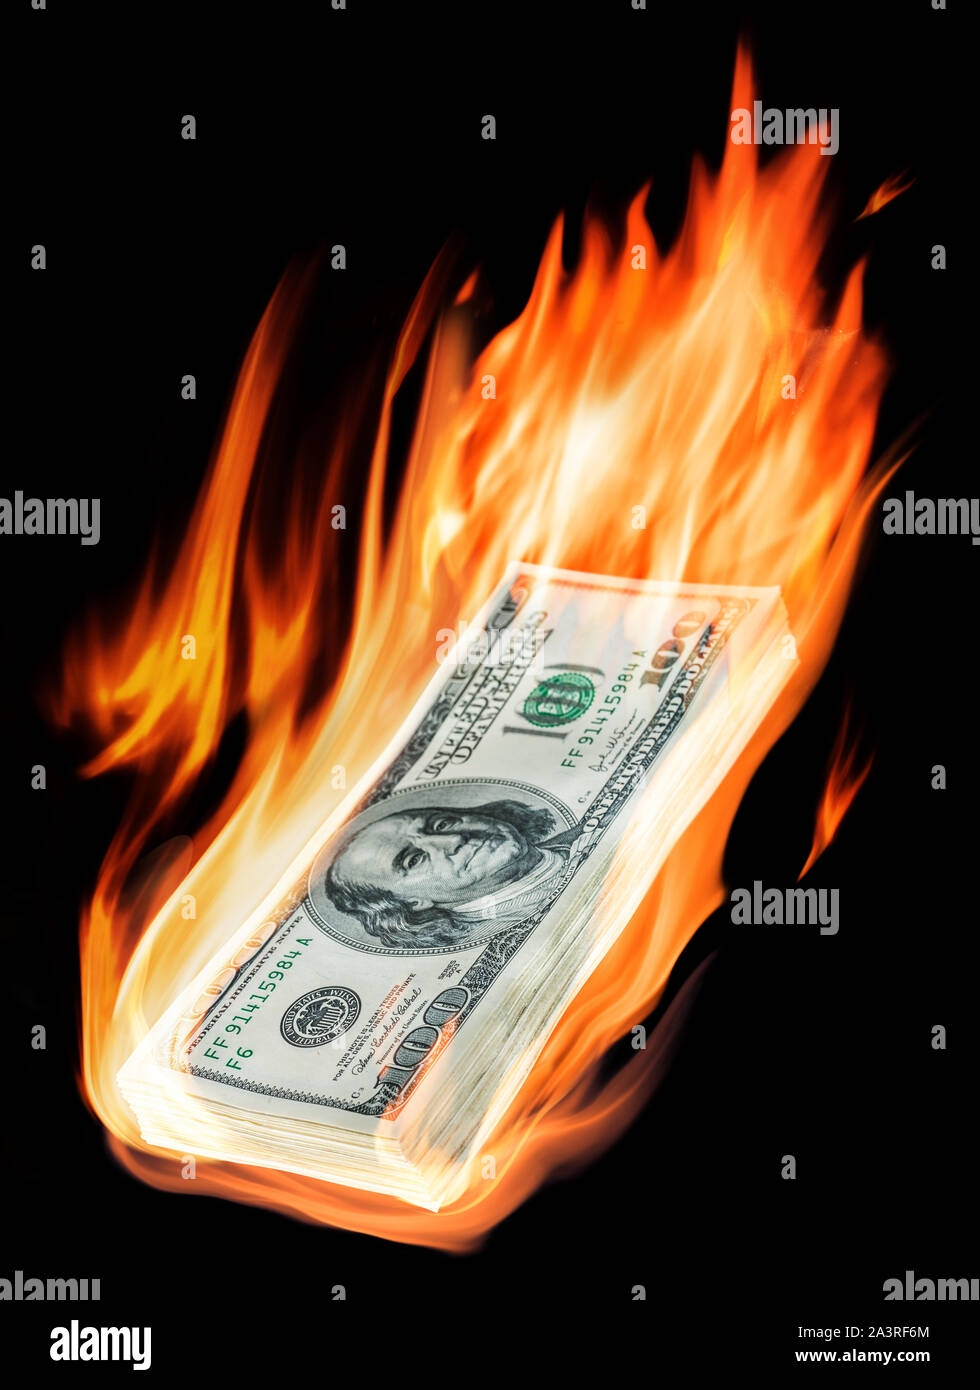 Burning one-hundred dollar bills in flames on black background. Conceptual picture. Stock Photo